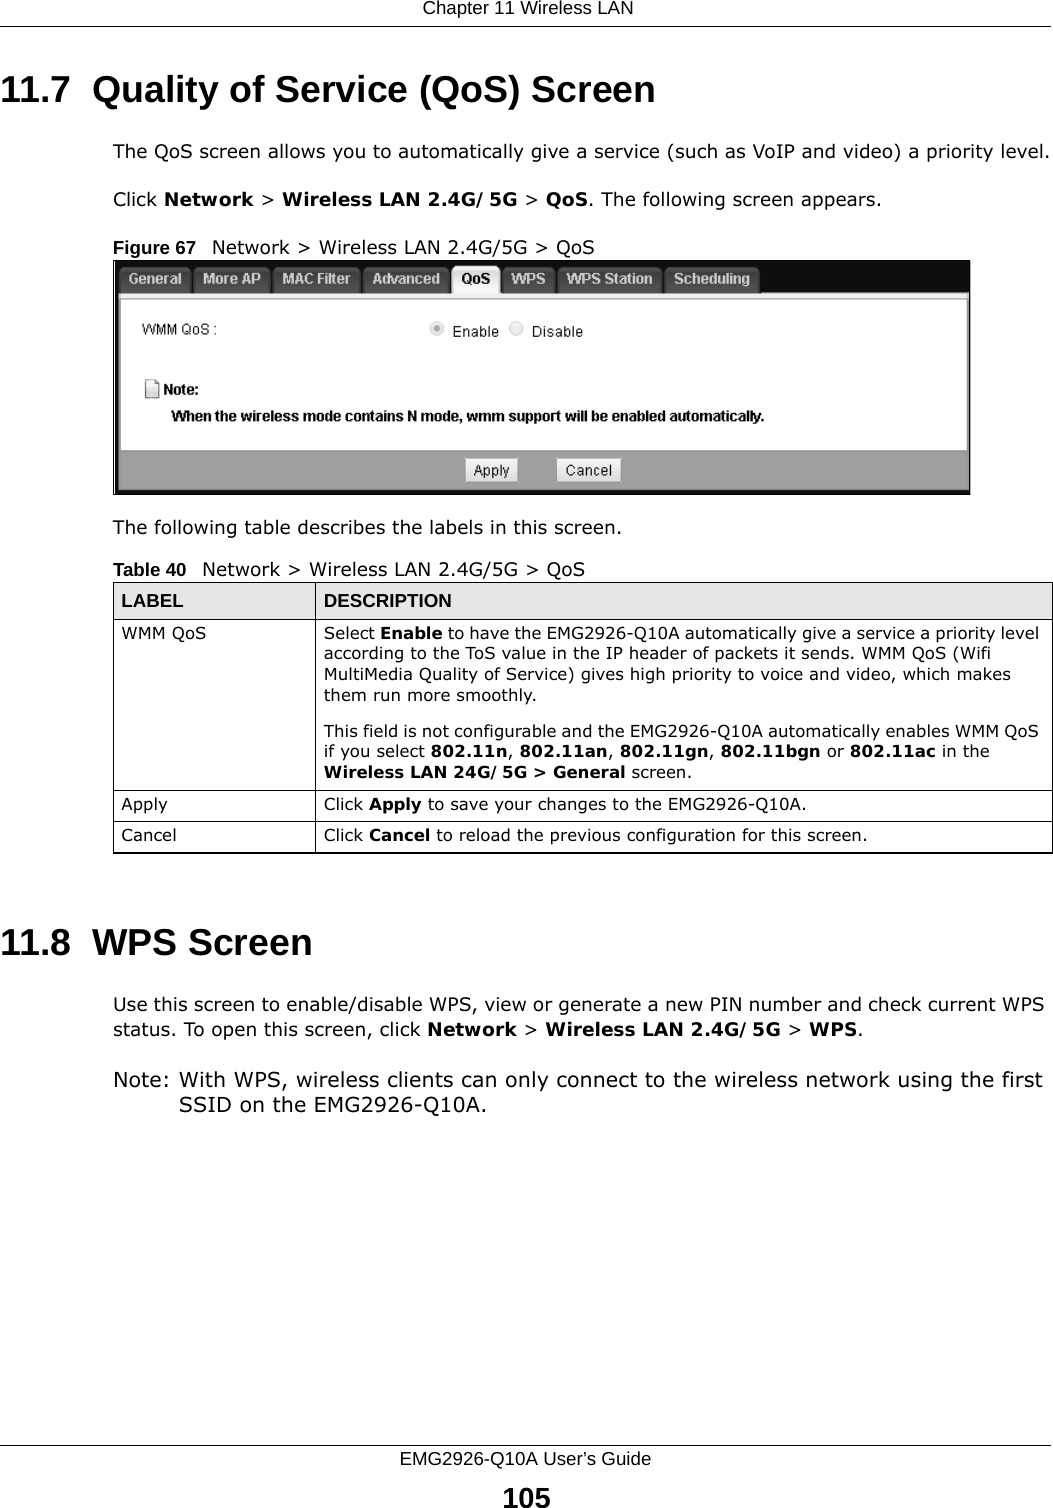  Chapter 11 Wireless LANEMG2926-Q10A User’s Guide10511.7  Quality of Service (QoS) ScreenThe QoS screen allows you to automatically give a service (such as VoIP and video) a priority level.Click Network &gt; Wireless LAN 2.4G/5G &gt; QoS. The following screen appears.Figure 67   Network &gt; Wireless LAN 2.4G/5G &gt; QoS The following table describes the labels in this screen. 11.8  WPS ScreenUse this screen to enable/disable WPS, view or generate a new PIN number and check current WPS status. To open this screen, click Network &gt; Wireless LAN 2.4G/5G &gt; WPS.Note: With WPS, wireless clients can only connect to the wireless network using the first SSID on the EMG2926-Q10A.Table 40   Network &gt; Wireless LAN 2.4G/5G &gt; QoSLABEL DESCRIPTIONWMM QoS Select Enable to have the EMG2926-Q10A automatically give a service a priority level according to the ToS value in the IP header of packets it sends. WMM QoS (Wifi MultiMedia Quality of Service) gives high priority to voice and video, which makes them run more smoothly.This field is not configurable and the EMG2926-Q10A automatically enables WMM QoS if you select 802.11n, 802.11an, 802.11gn, 802.11bgn or 802.11ac in the Wireless LAN 24G/5G &gt; General screen.Apply Click Apply to save your changes to the EMG2926-Q10A.Cancel Click Cancel to reload the previous configuration for this screen.